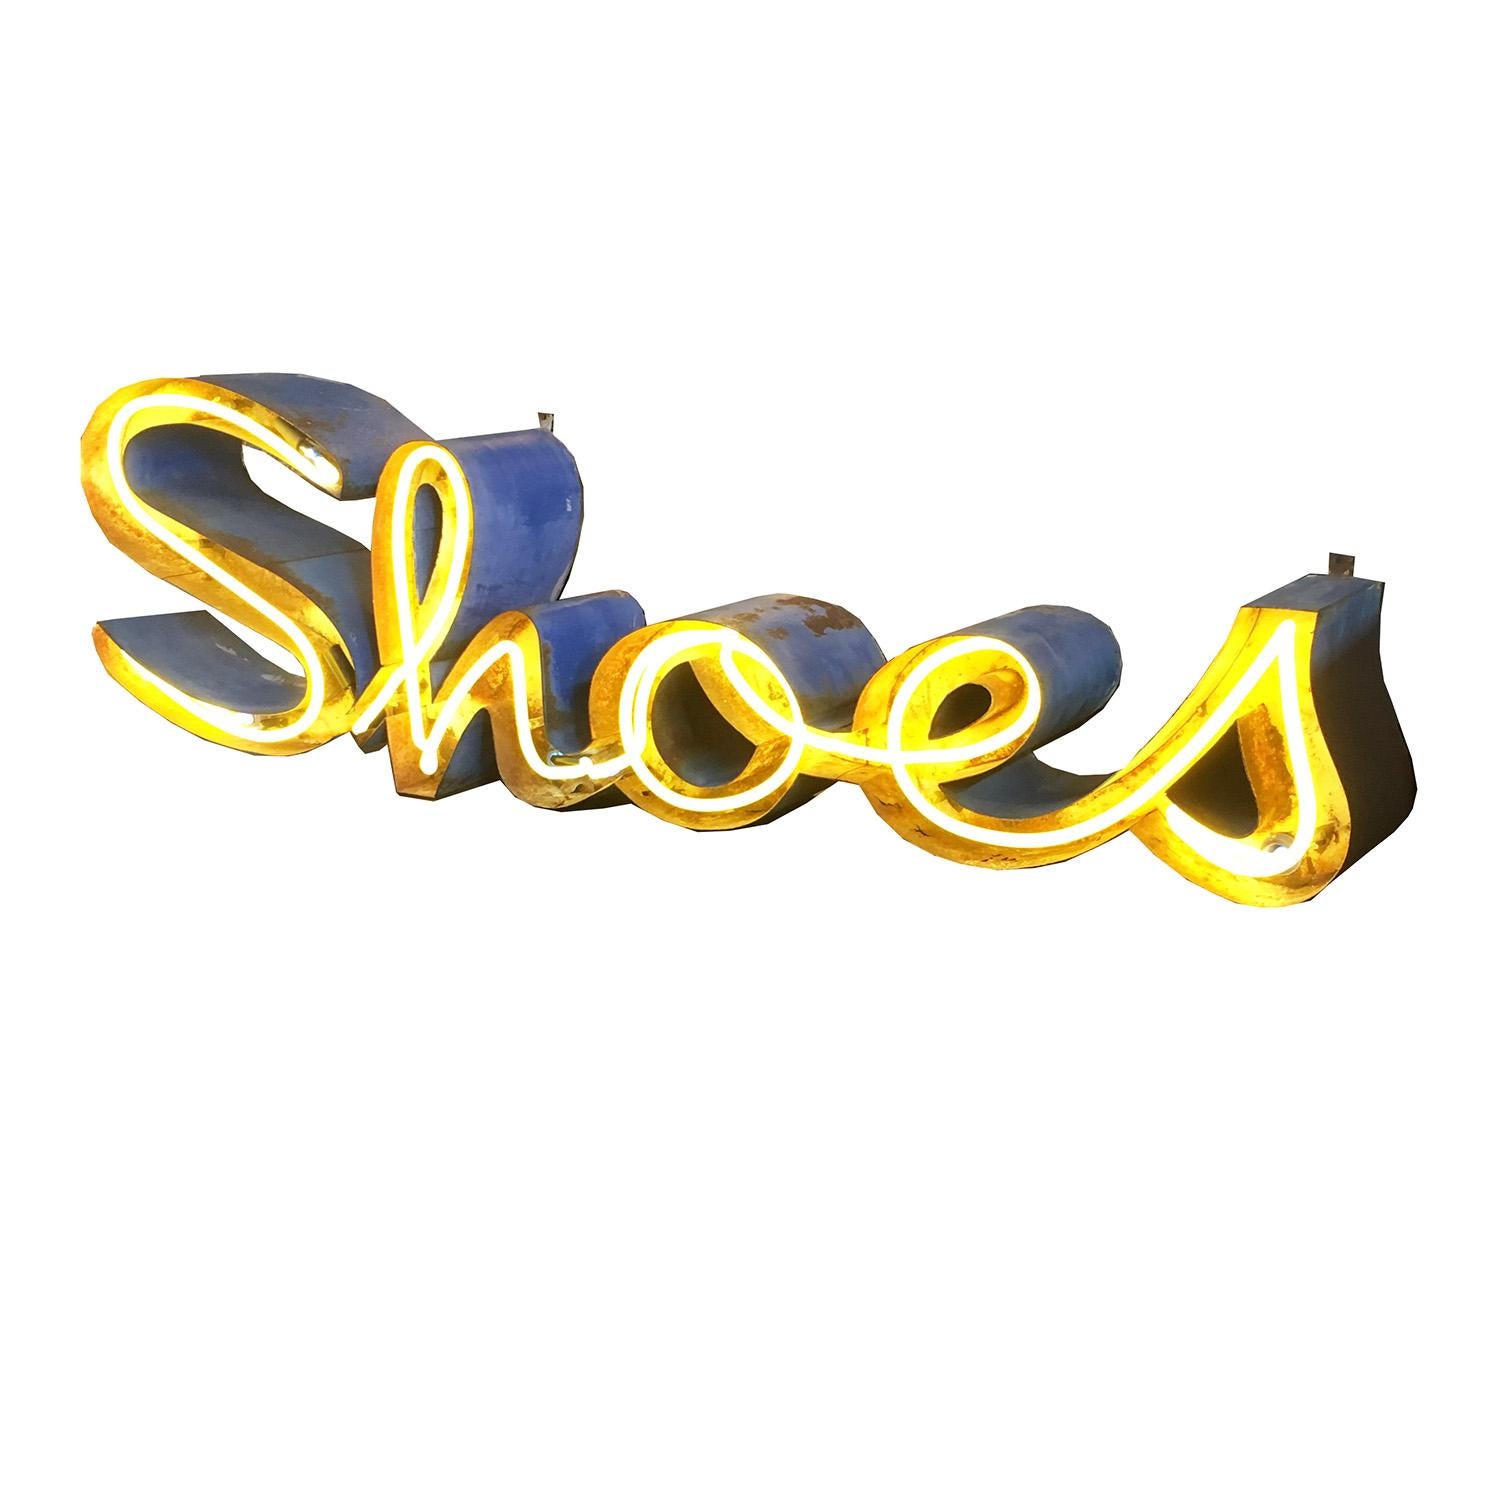 Steel and Neon "Shoes" Wall Display Sign